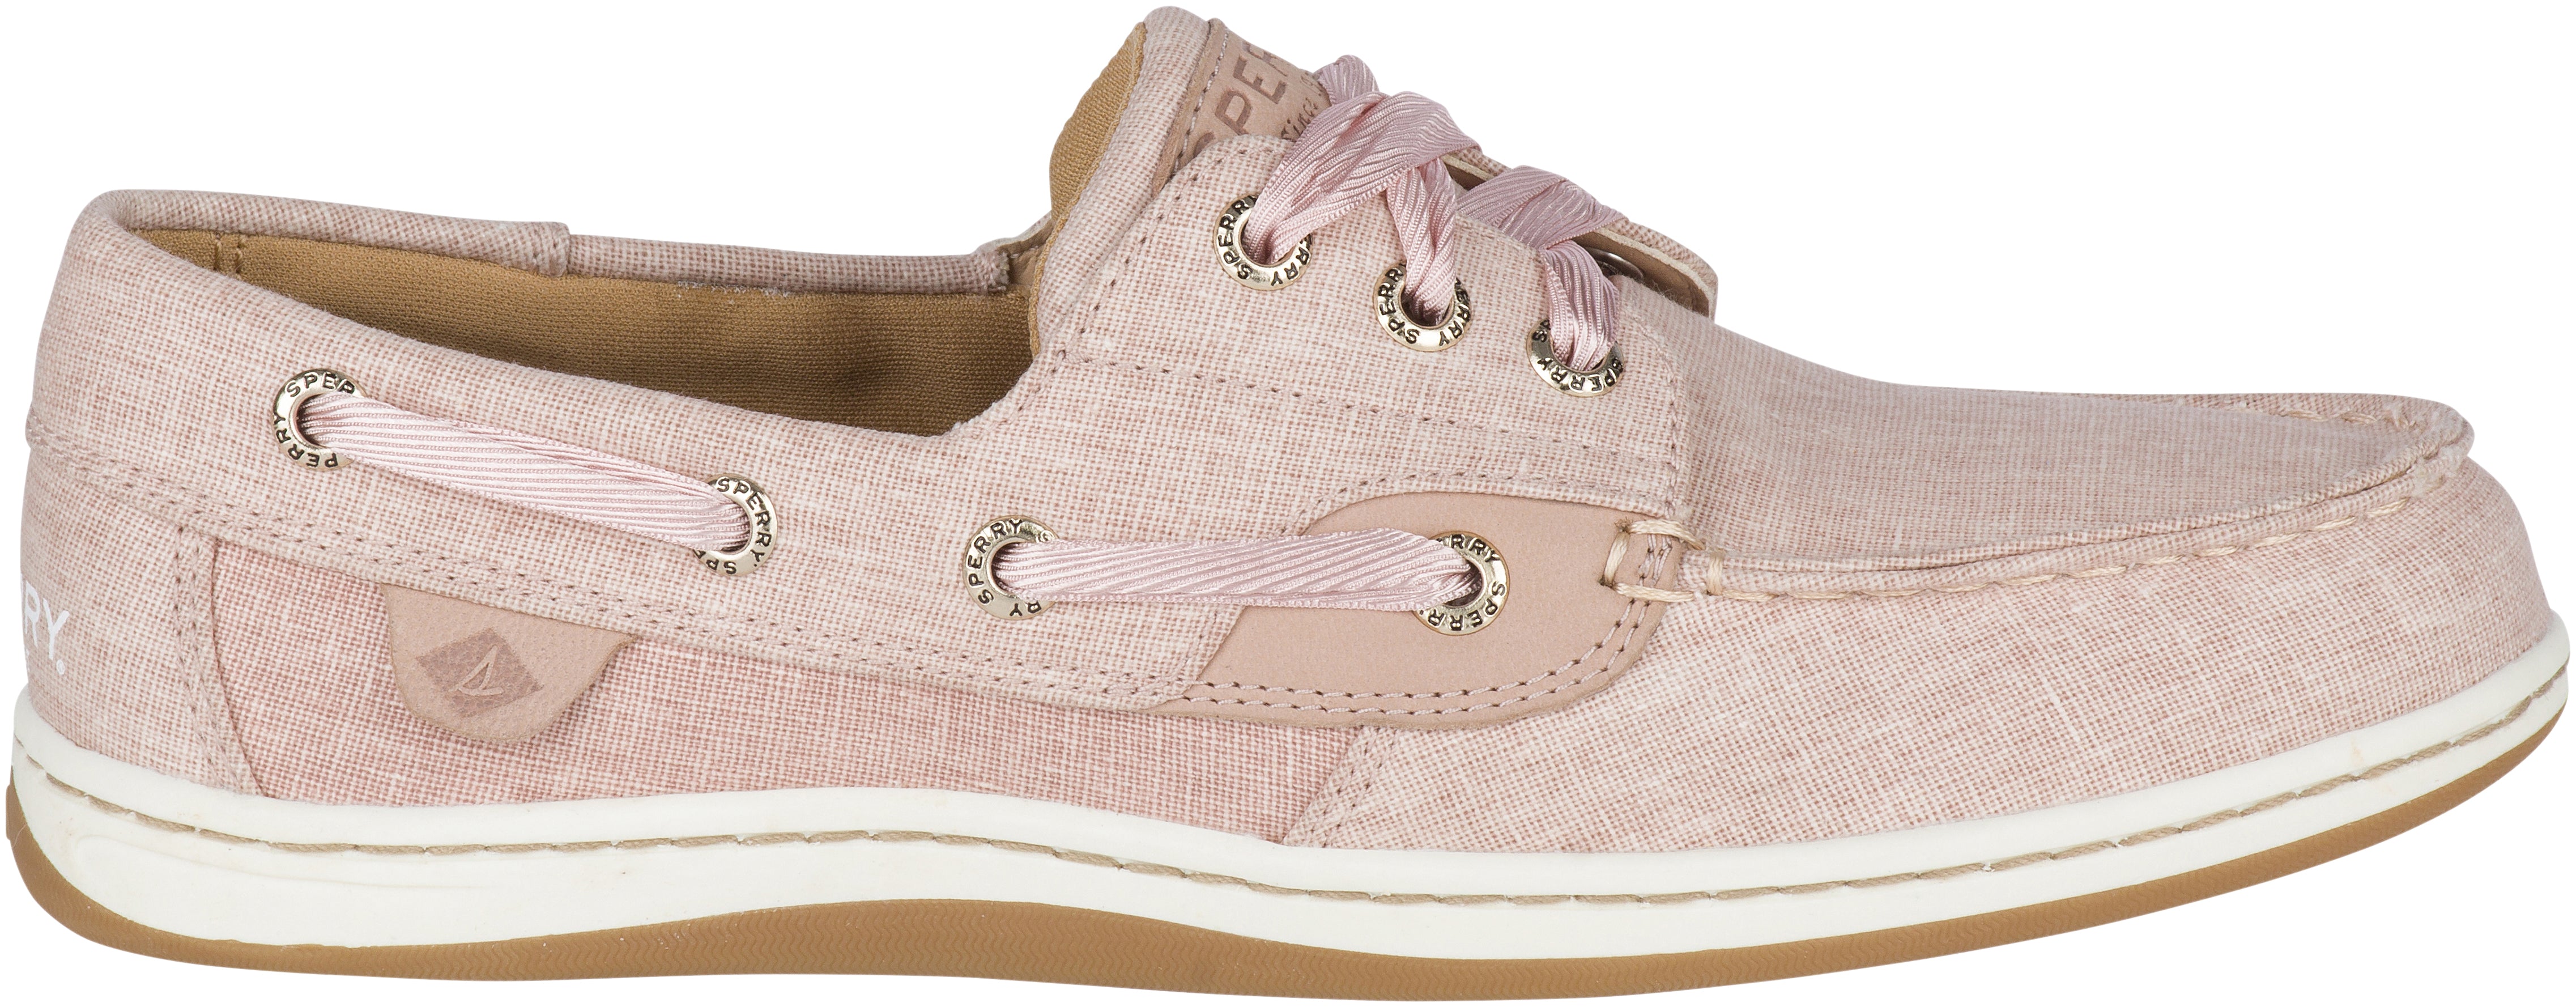 sperry top sider boat shoes womens